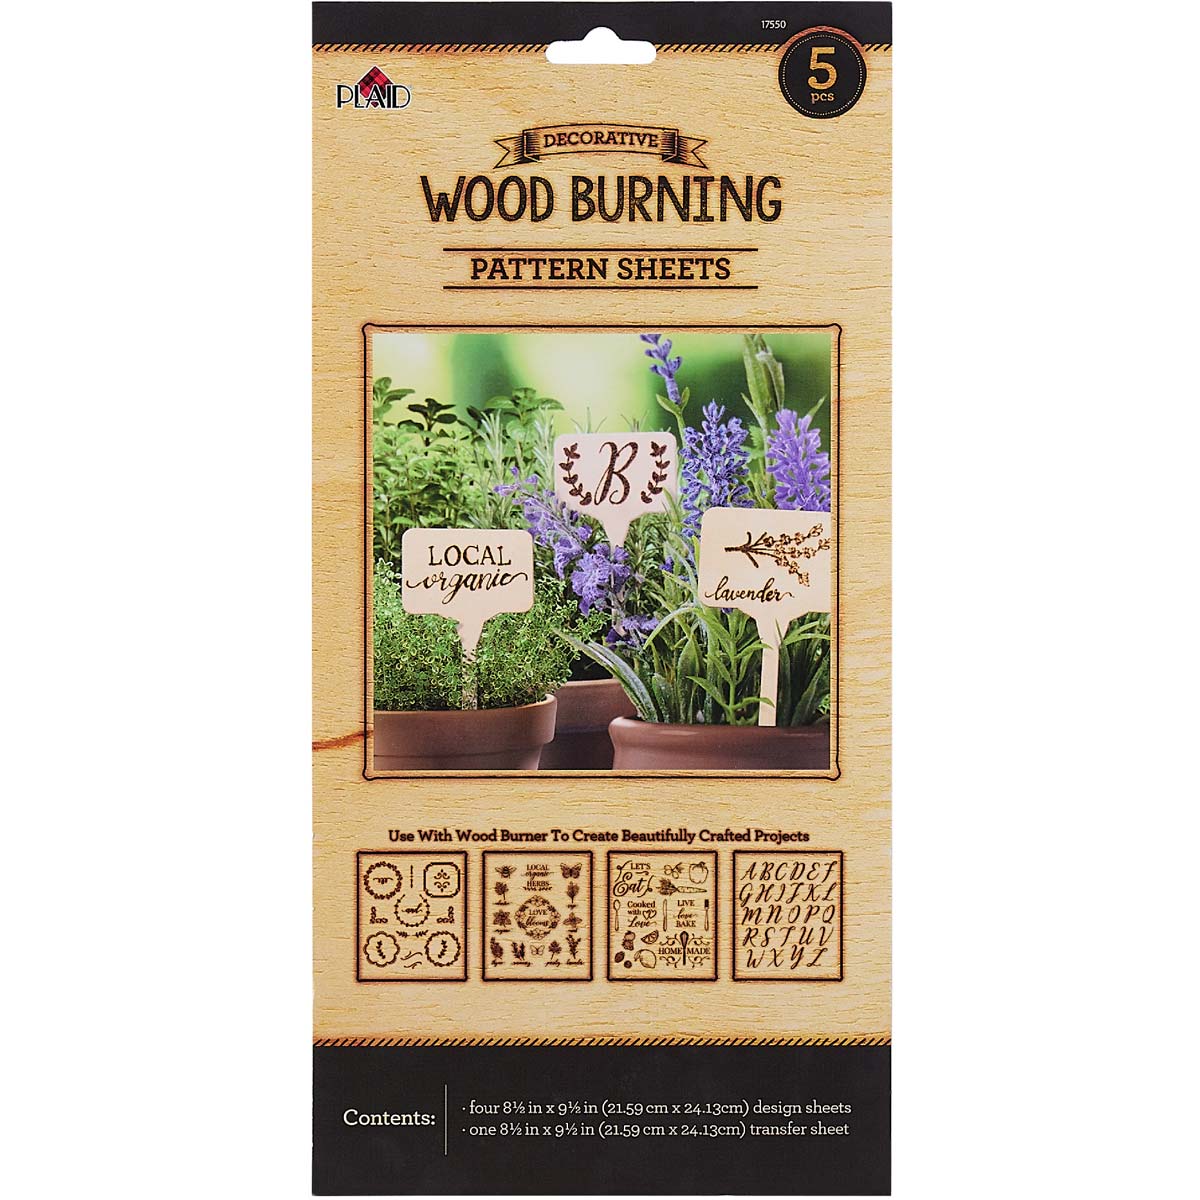 wood burning pattern sheets outdoor theme